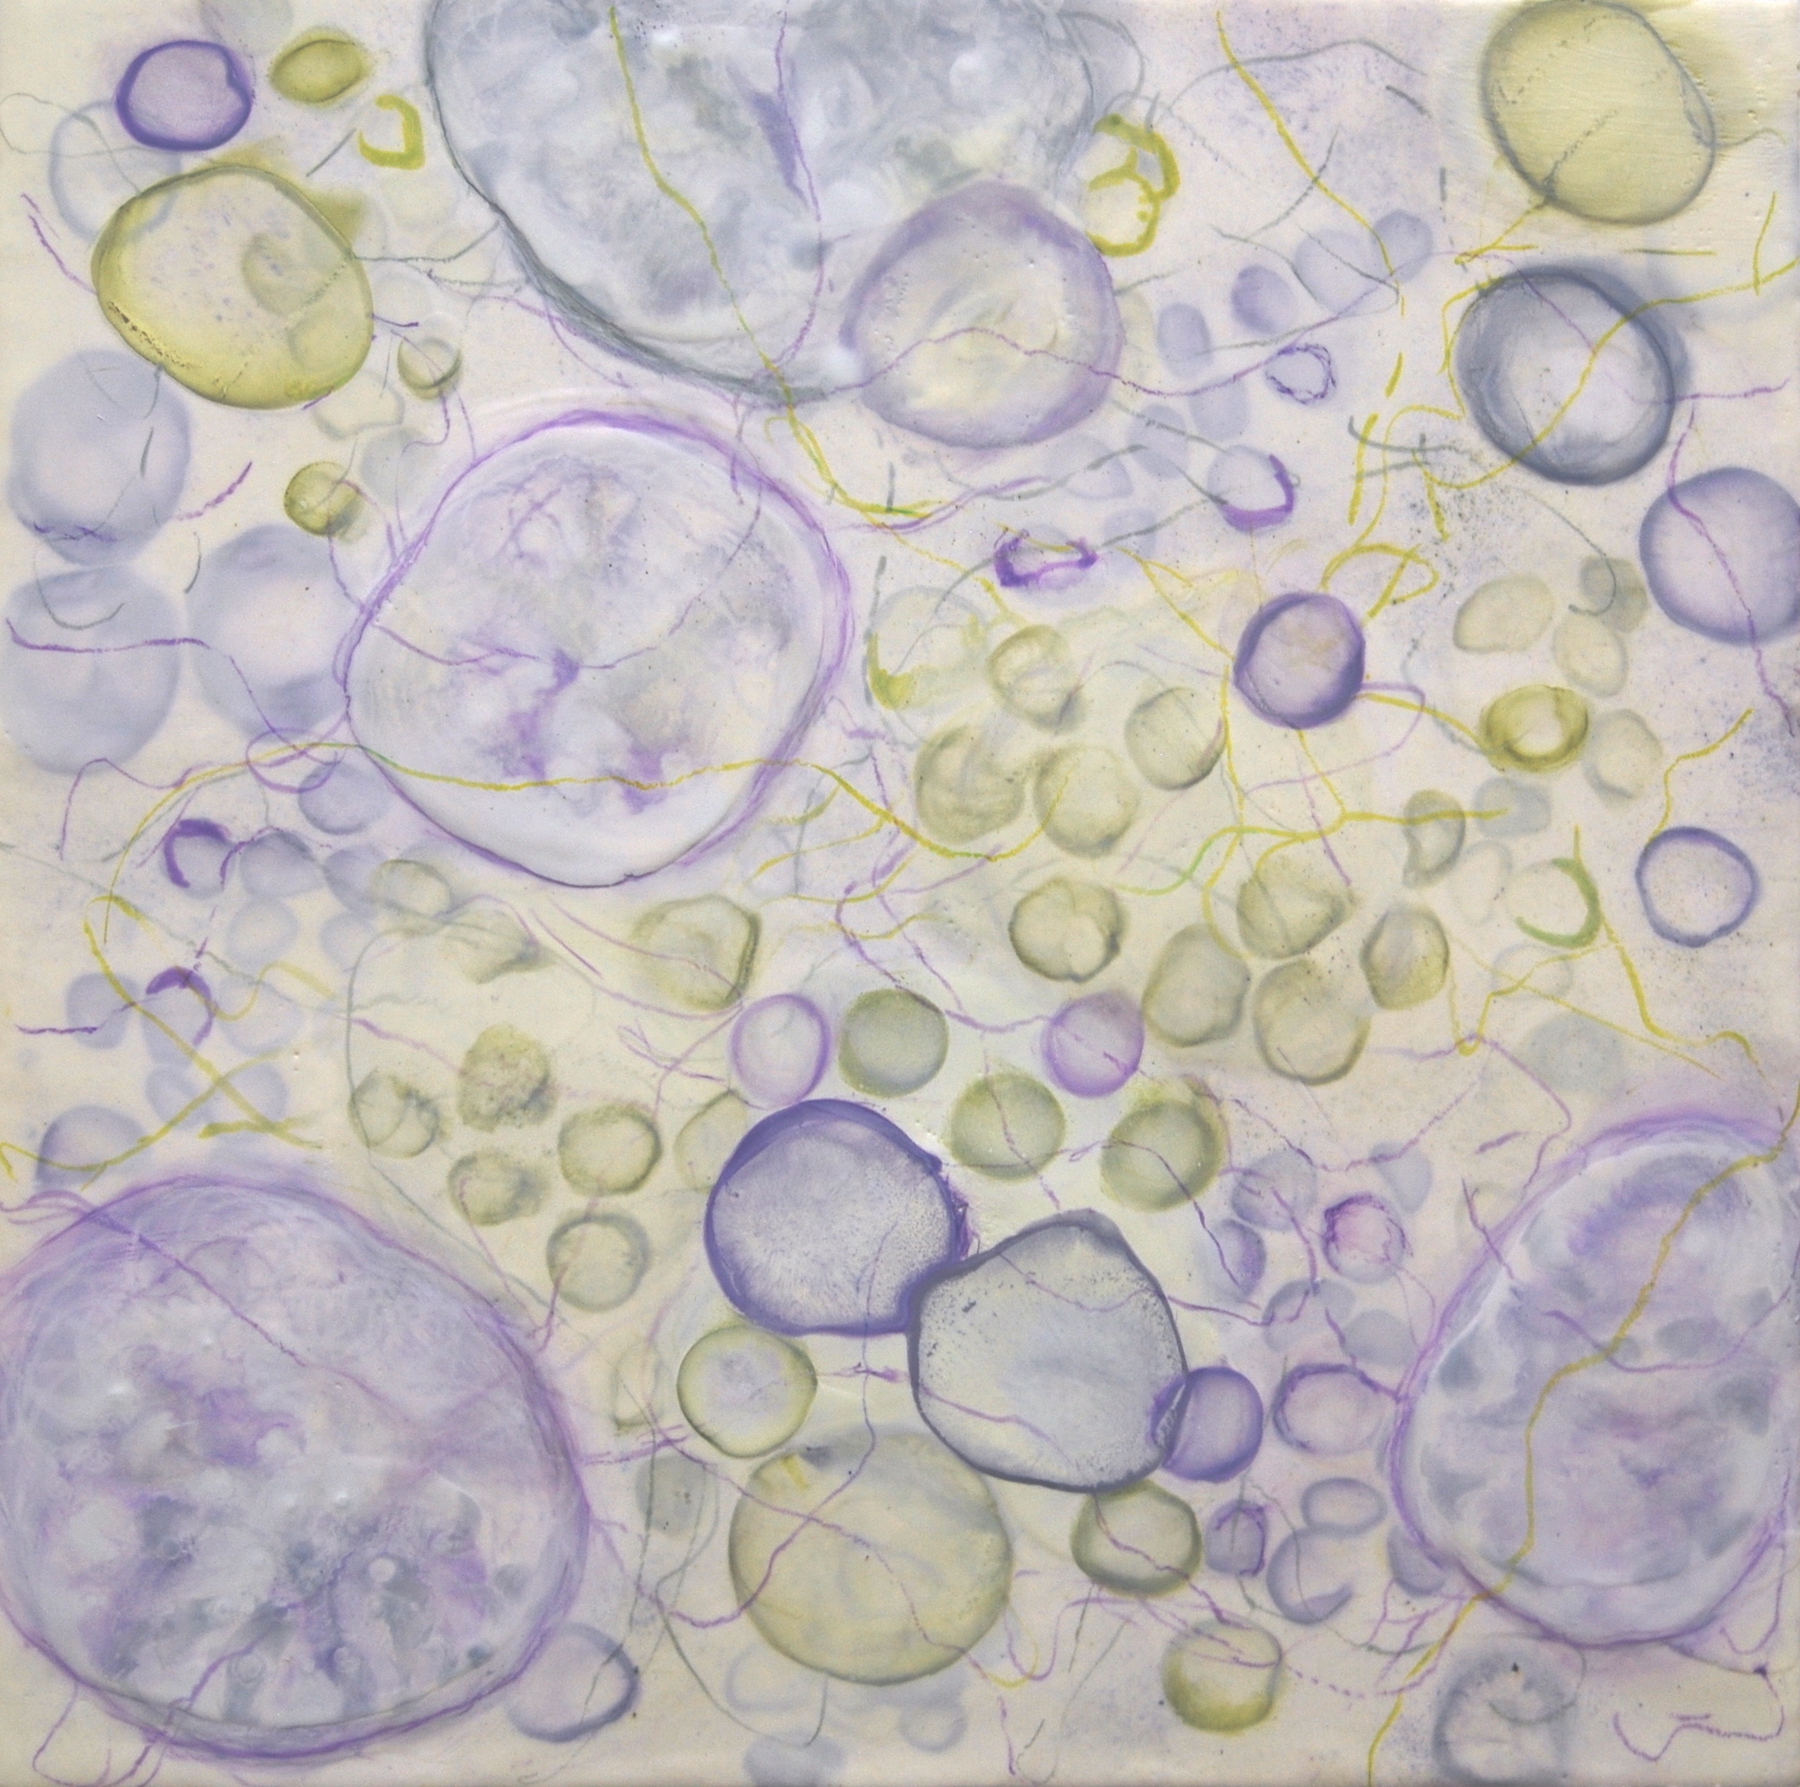  K. Hartung,  Cell Migration 9 , encaustic and mixed media, 20x20 